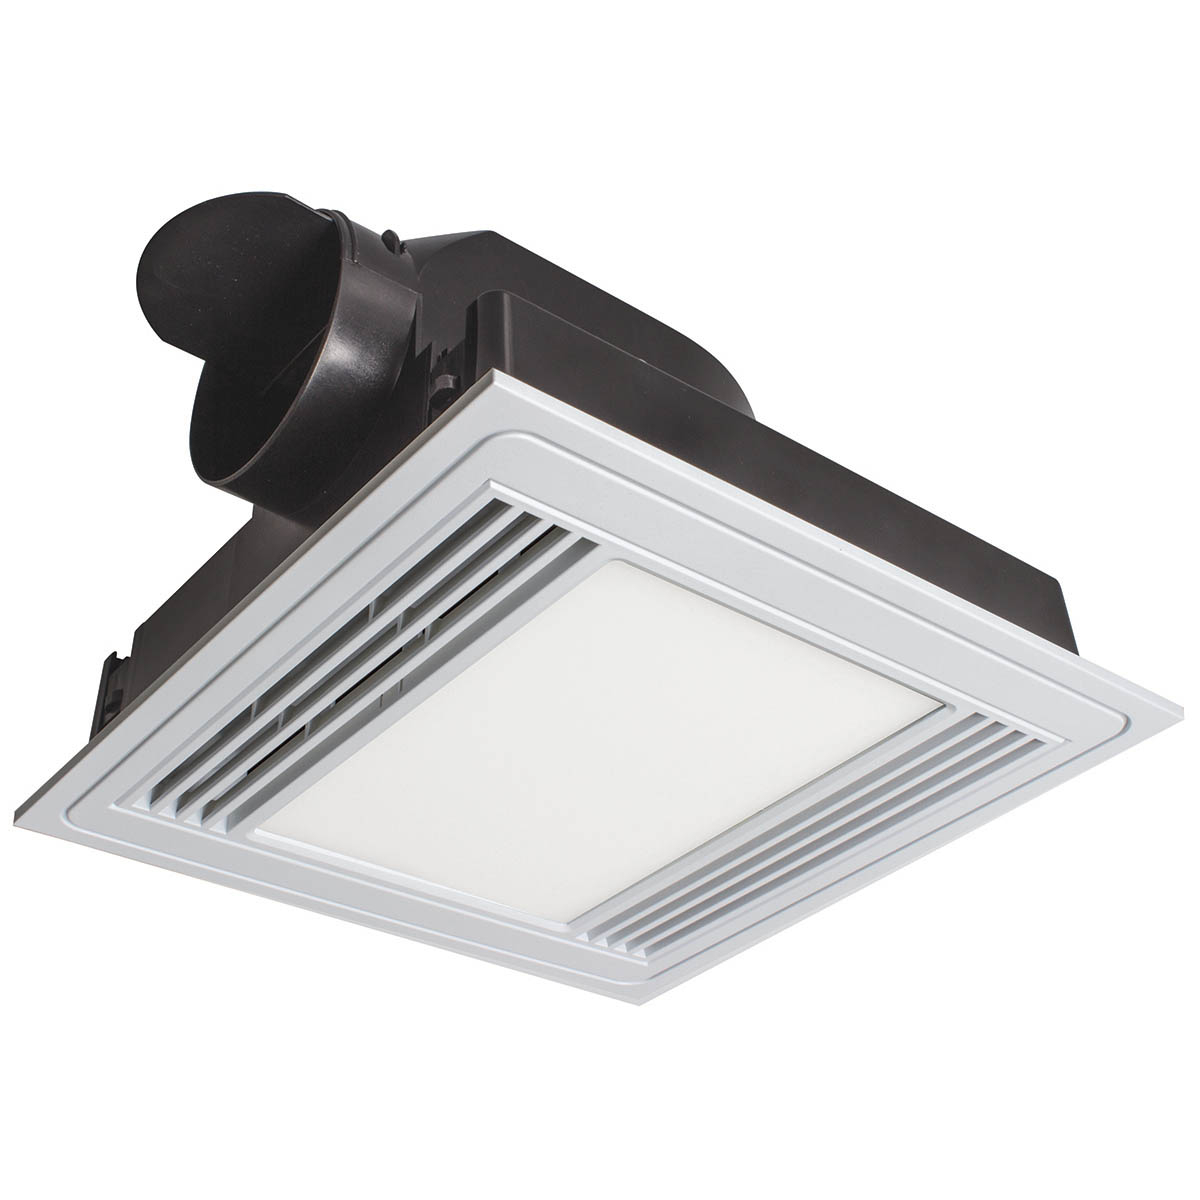 Tercel Exhaust Fan With Led Light Brilliant Lighting within dimensions 1200 X 1200